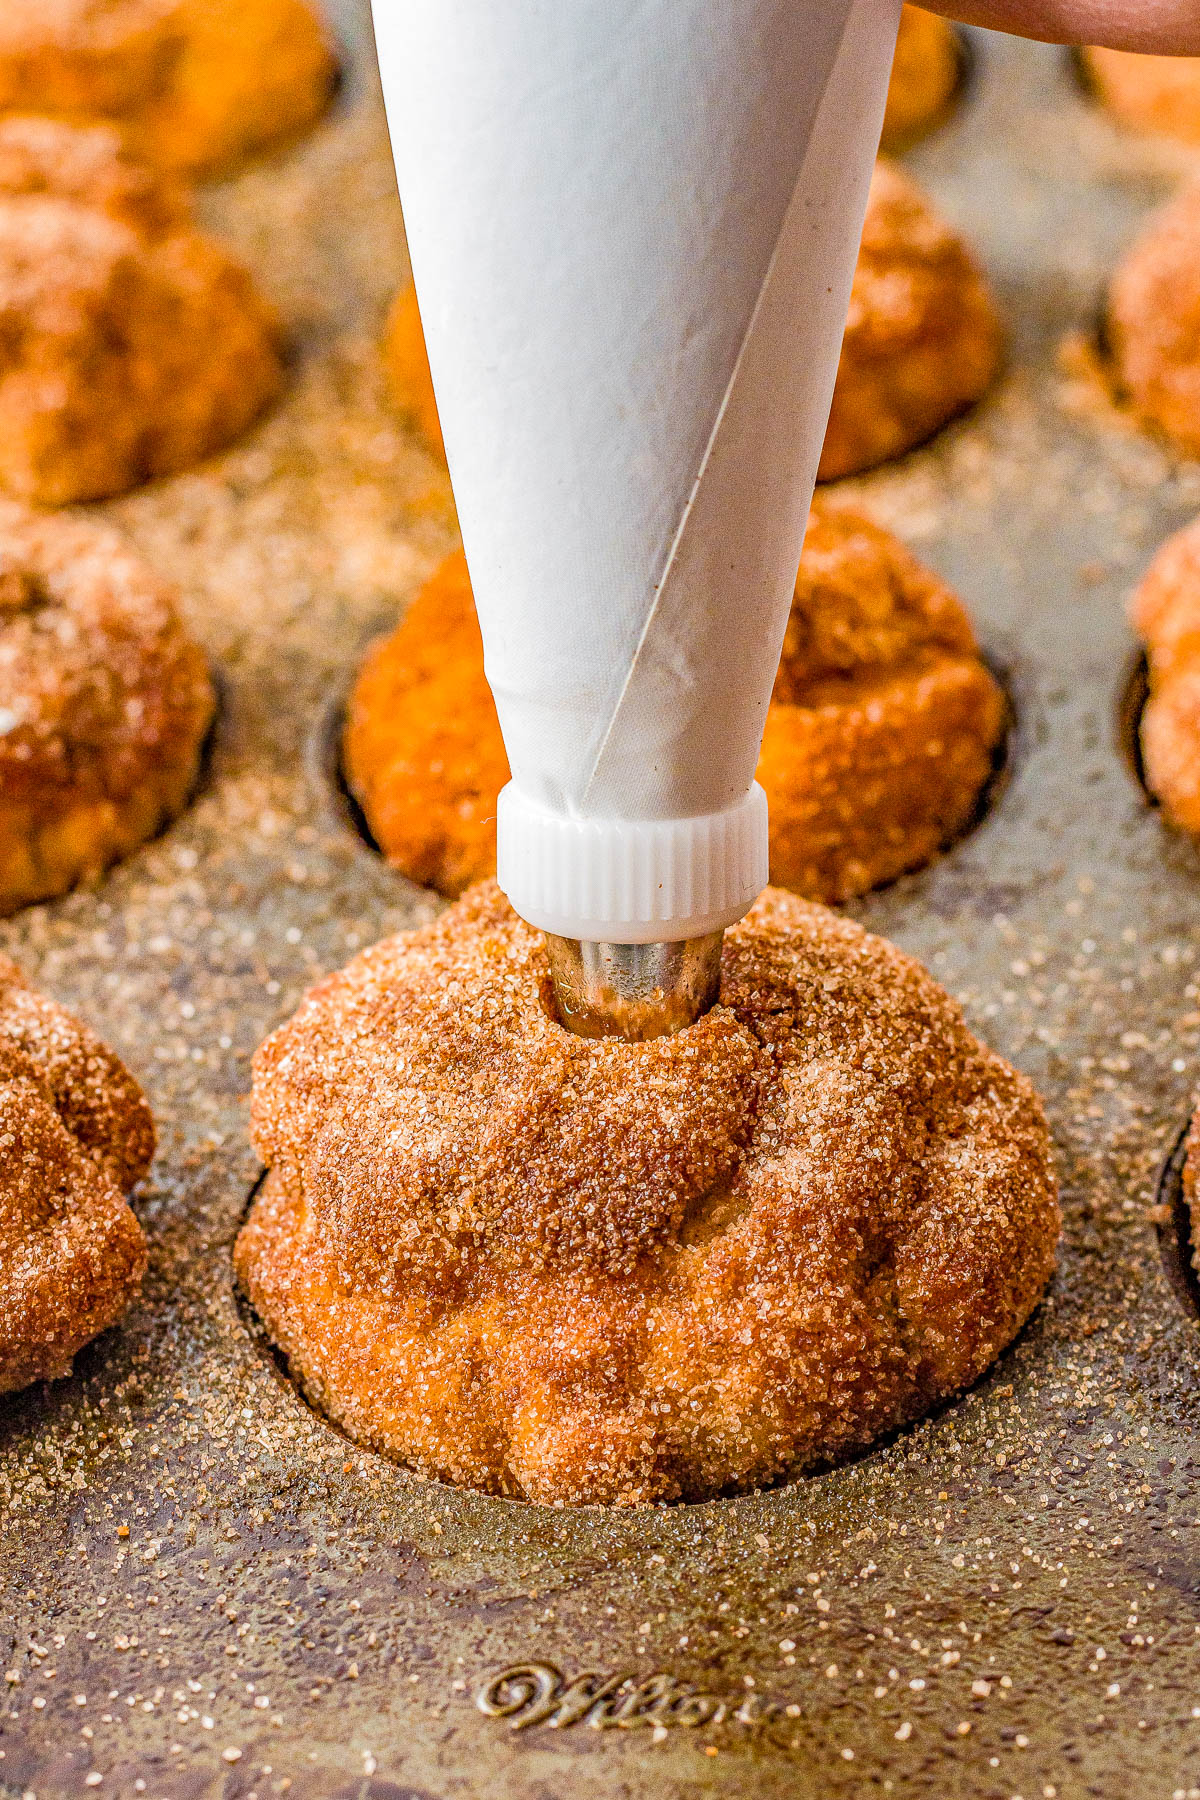 Dulce de Leche Churro Muffins - All the flavors and satisfaction of fresh churros but in muffin form with no frying involved! Brushed with melted butter, rolled in cinnamon-and-sugar, and filled with dulce de leche or caramel sauce, these FAST and EASY muffins are so soft, moist, and PERFECTLY decadent! 